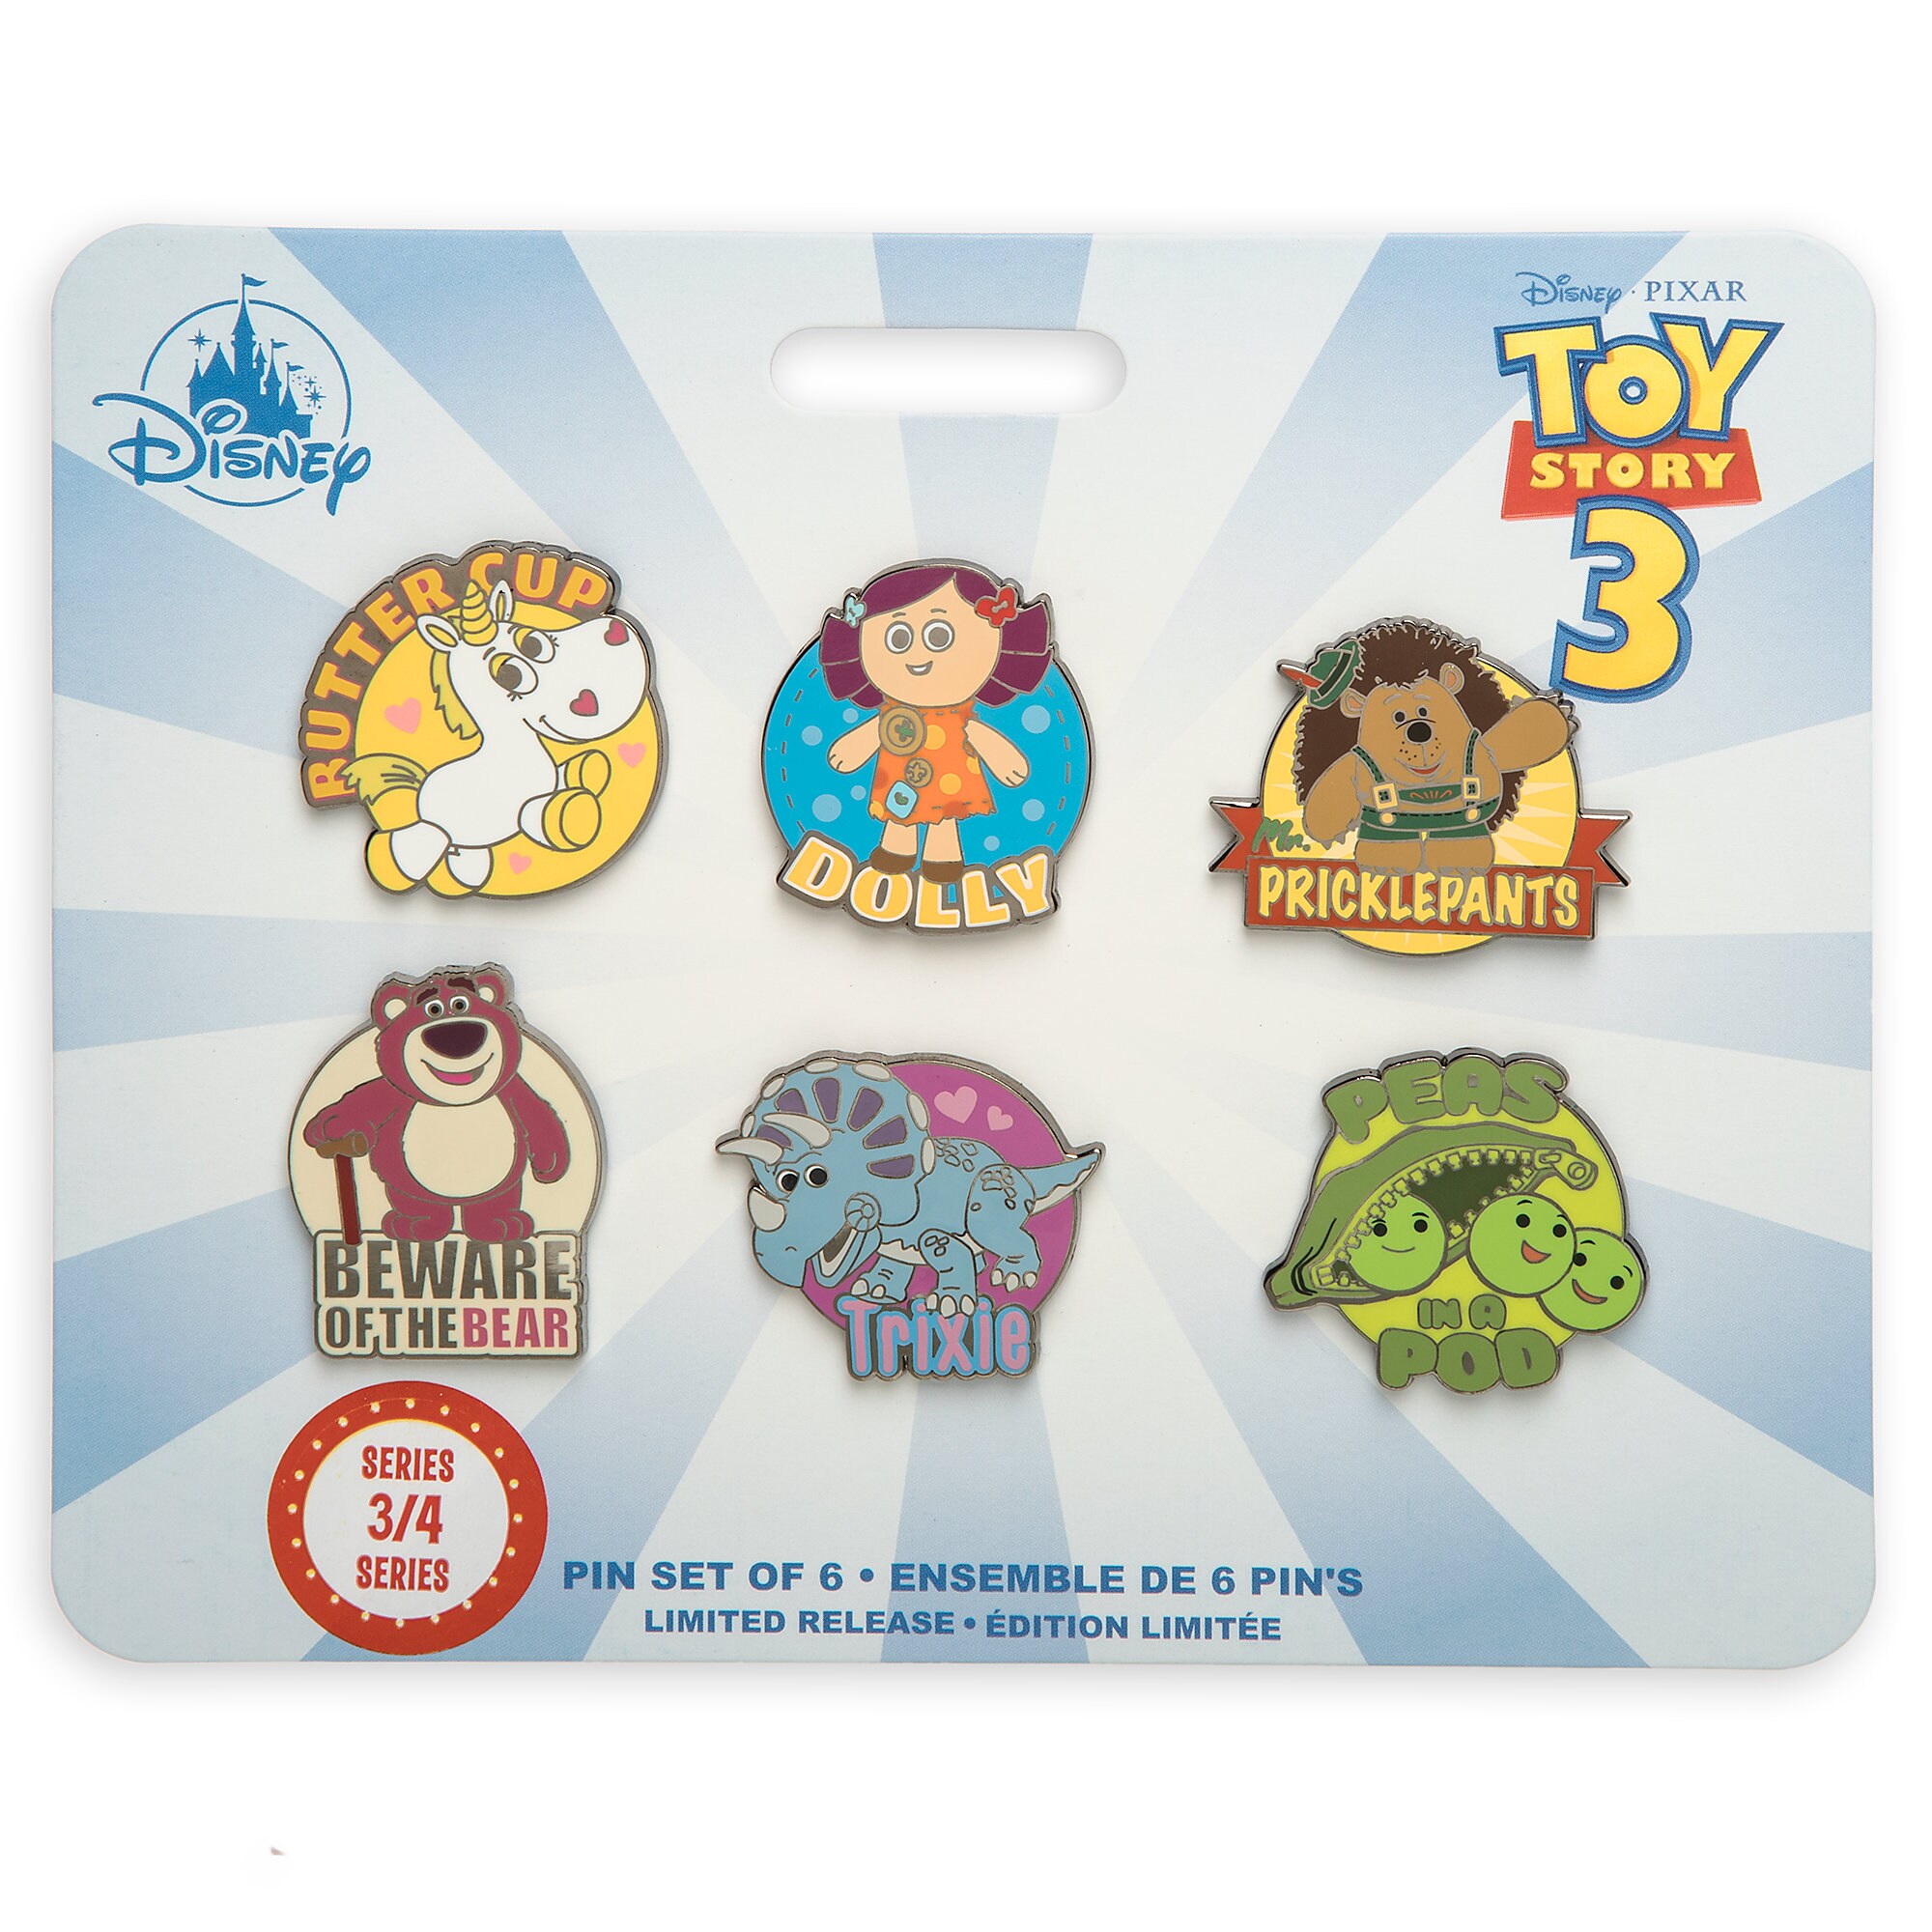 Toy Story 3 Pin Set - Limited Release